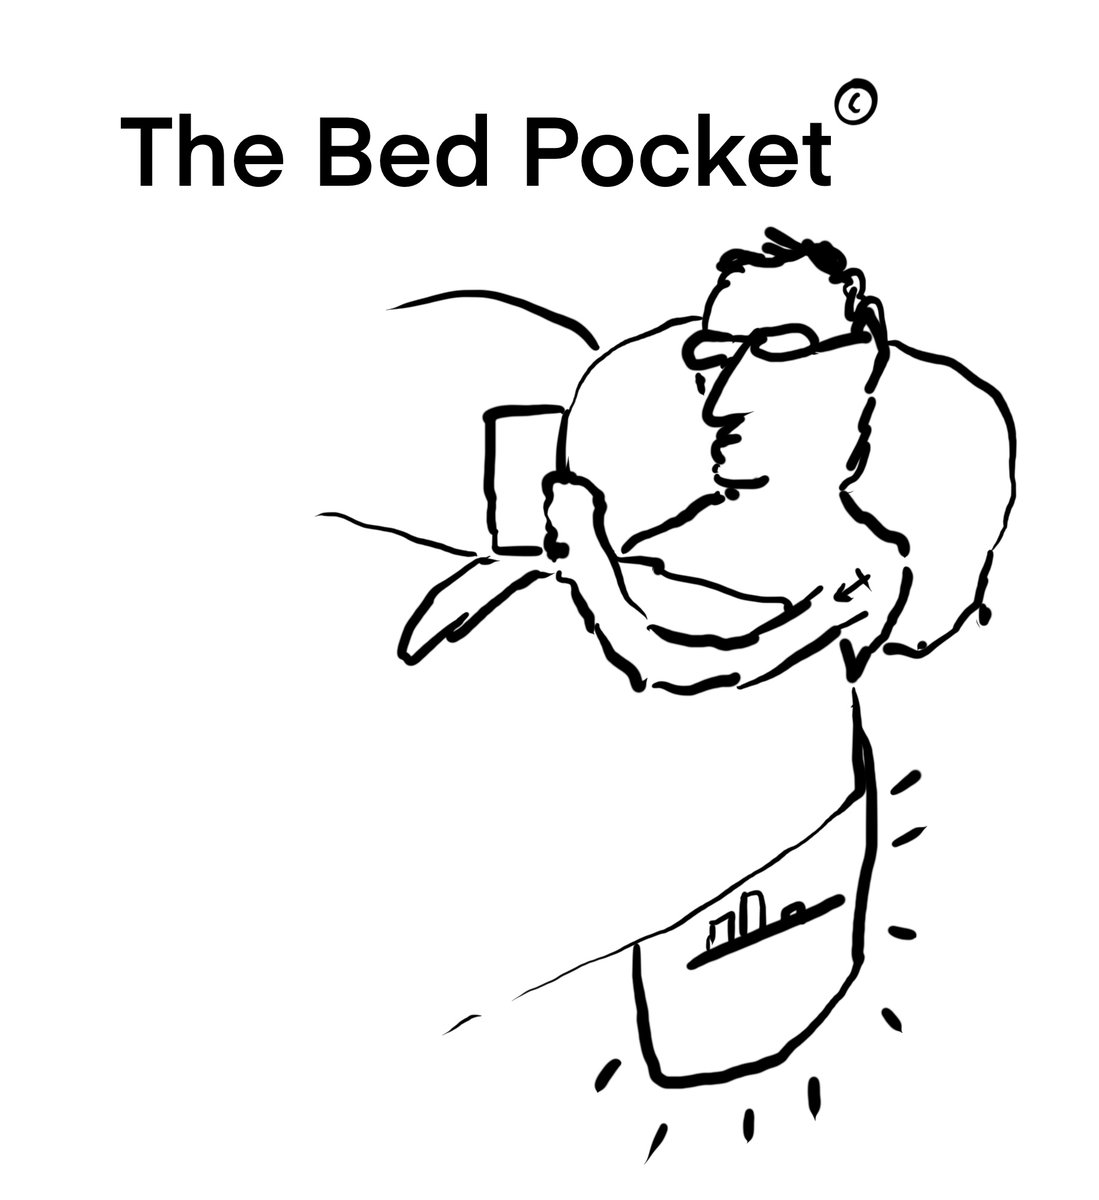 Last night on the show I shared my invention - 'The Bed Pocket' a saddle style leather pocket that sits under the mattress to hold your phone / spex / keys. I've drawn it for you.